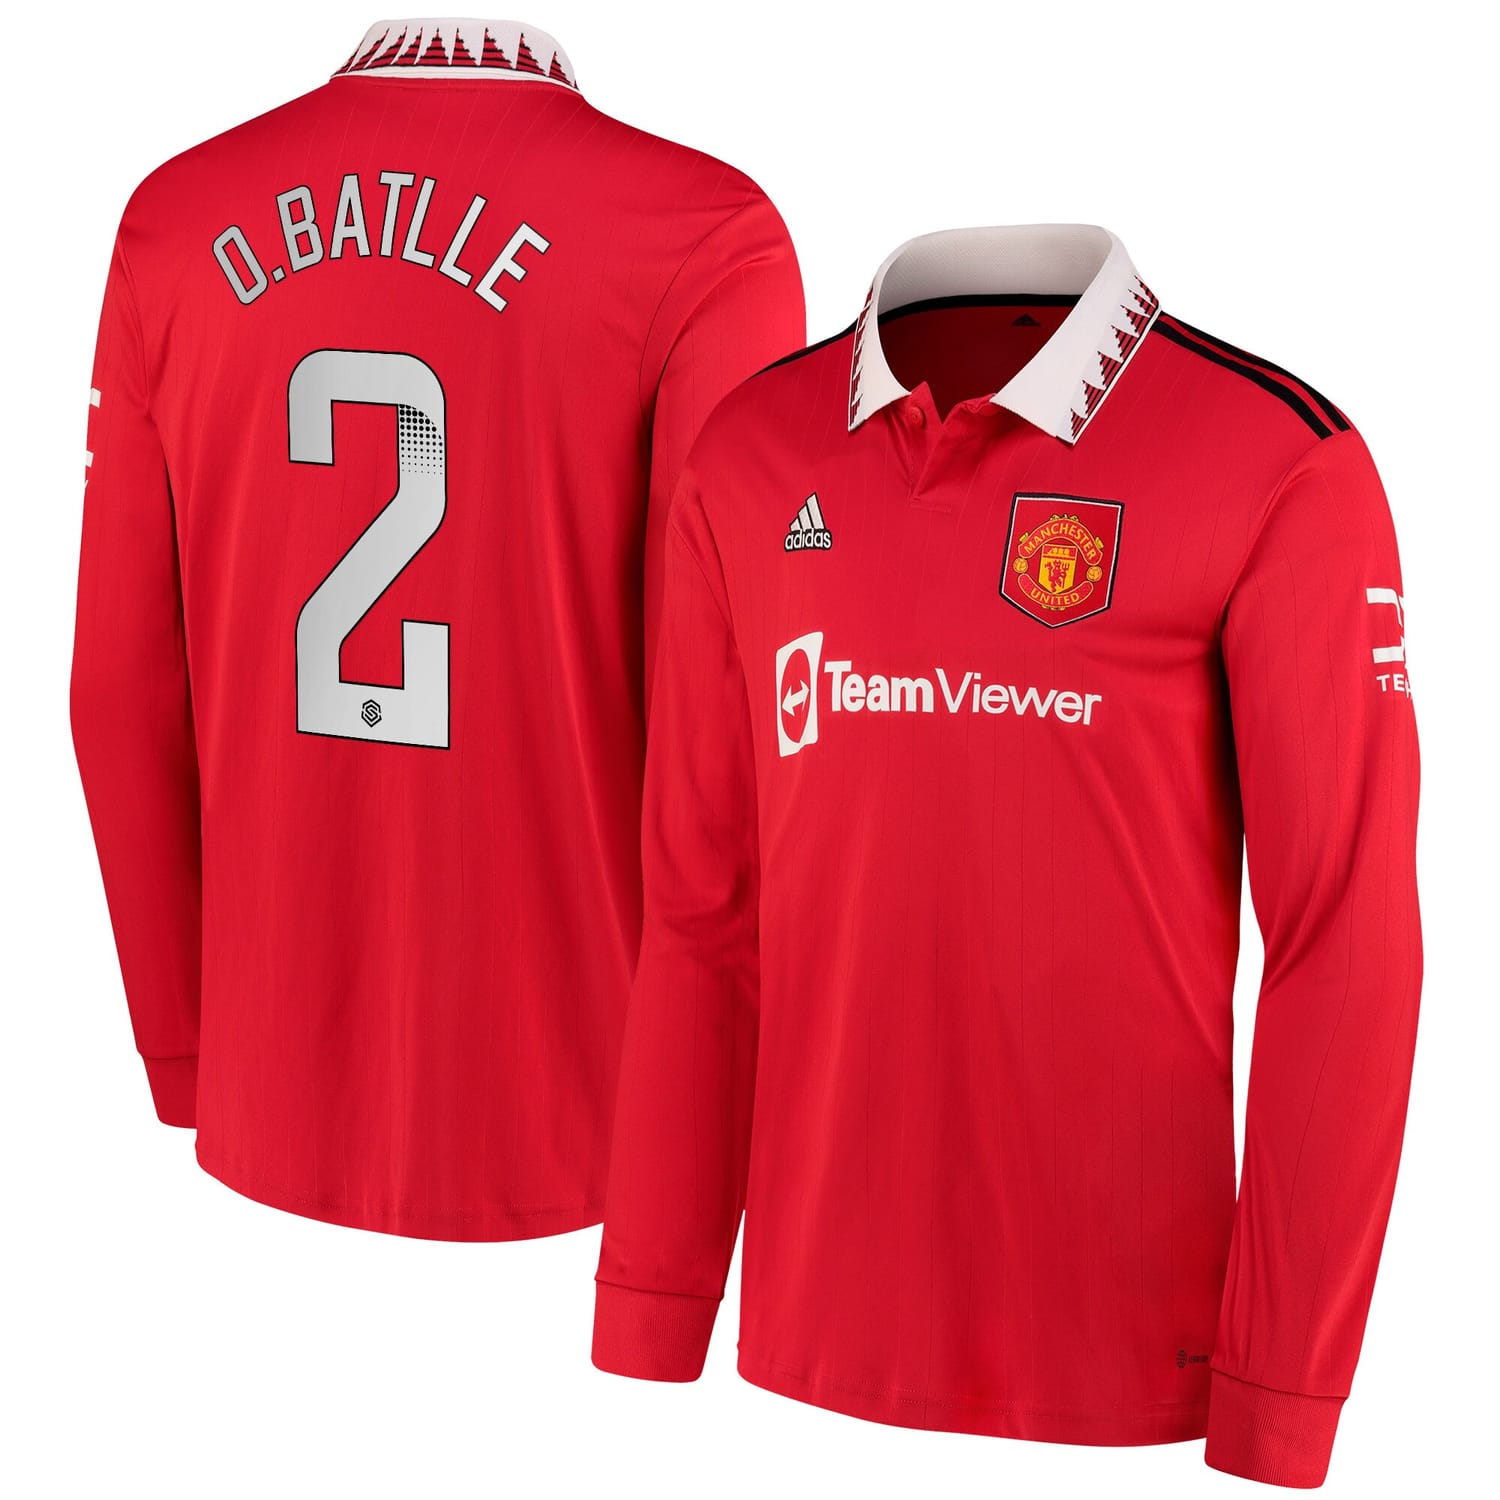 Premier League Manchester United Home WSL Jersey Shirt Long Sleeve 2022-23 player Ona Batlle 2 printing for Men